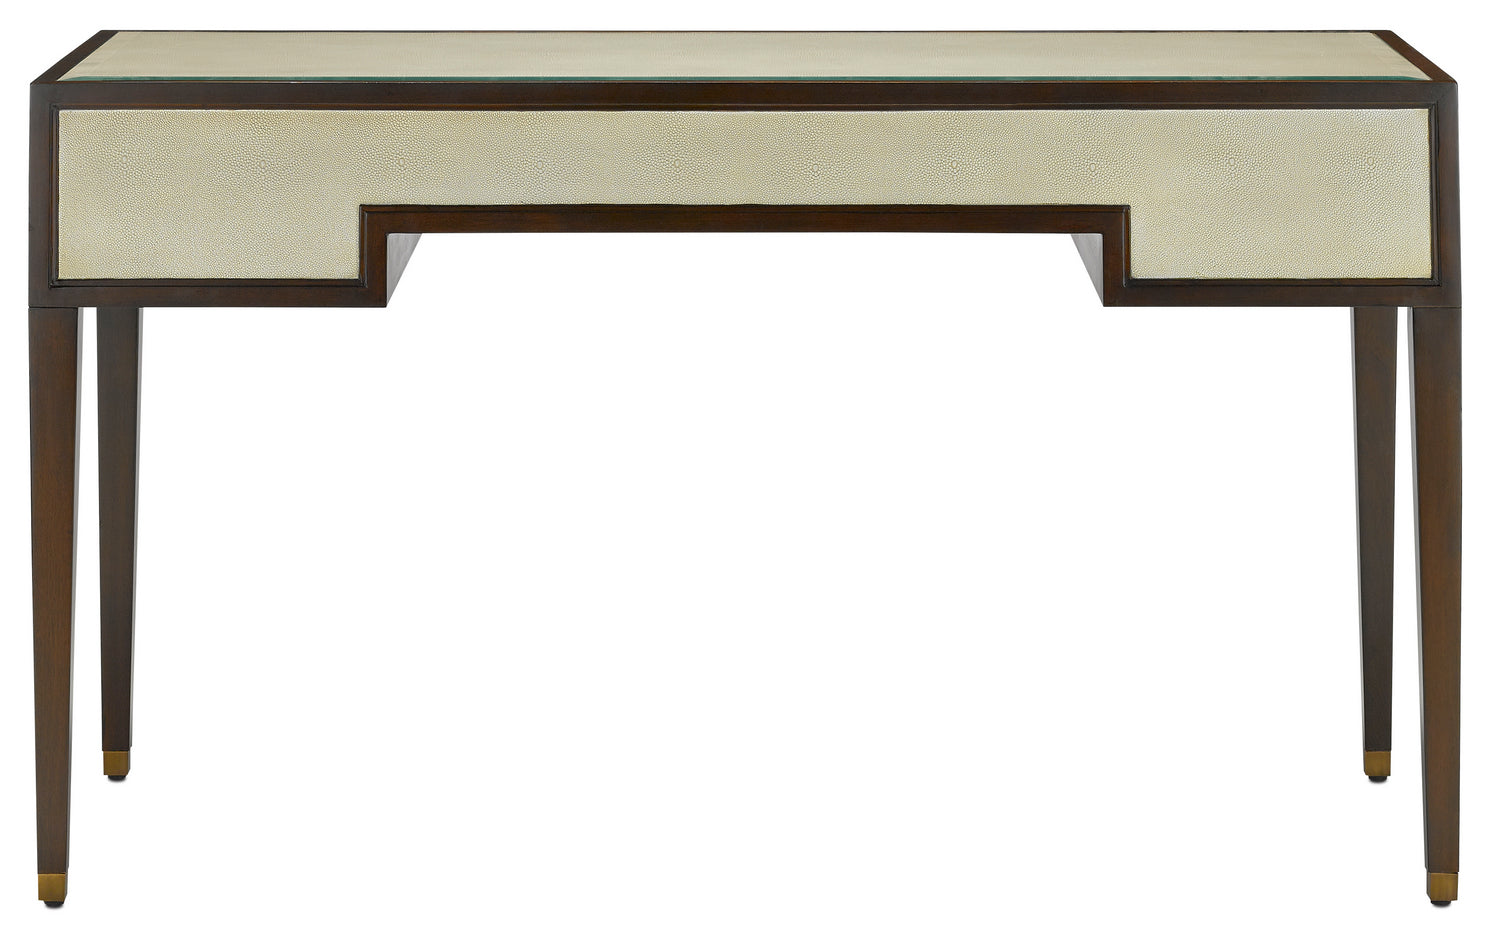 Desk from the Evie collection in Ivory/Dark Walnut/Brass/Clear finish